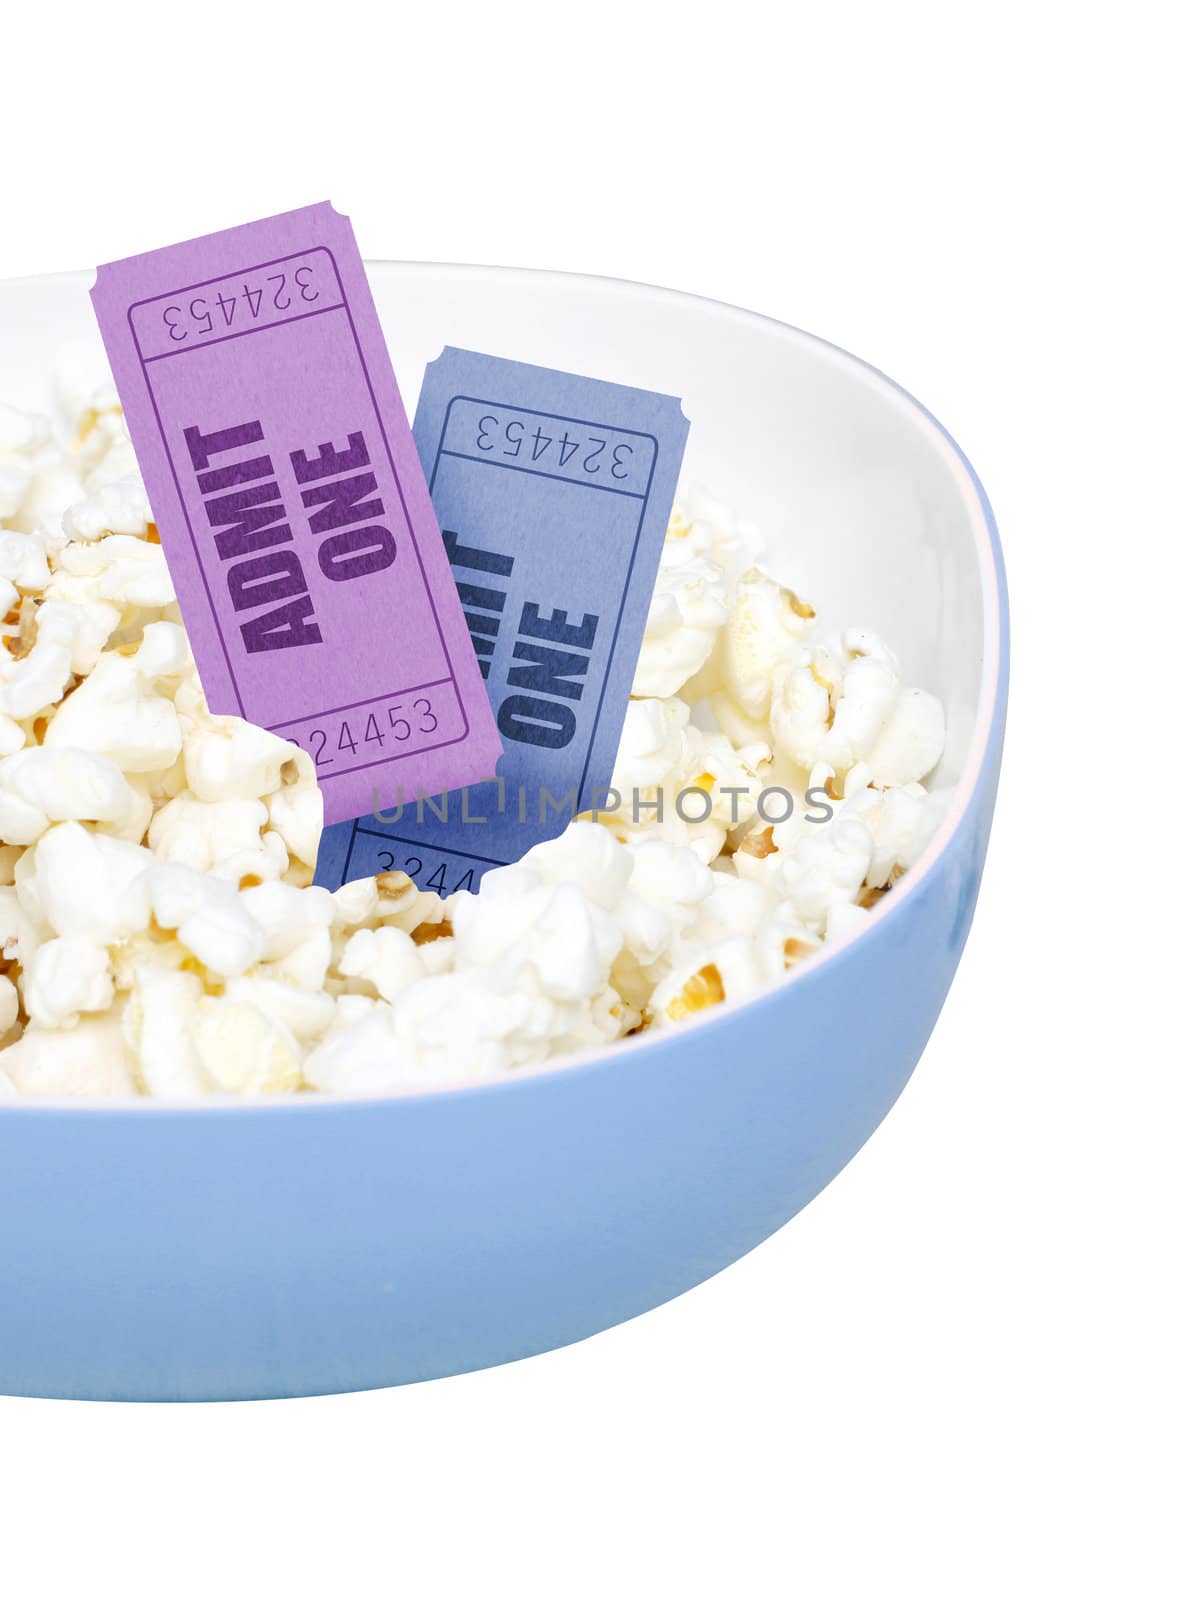 Popcorn and movie tickets by leeser